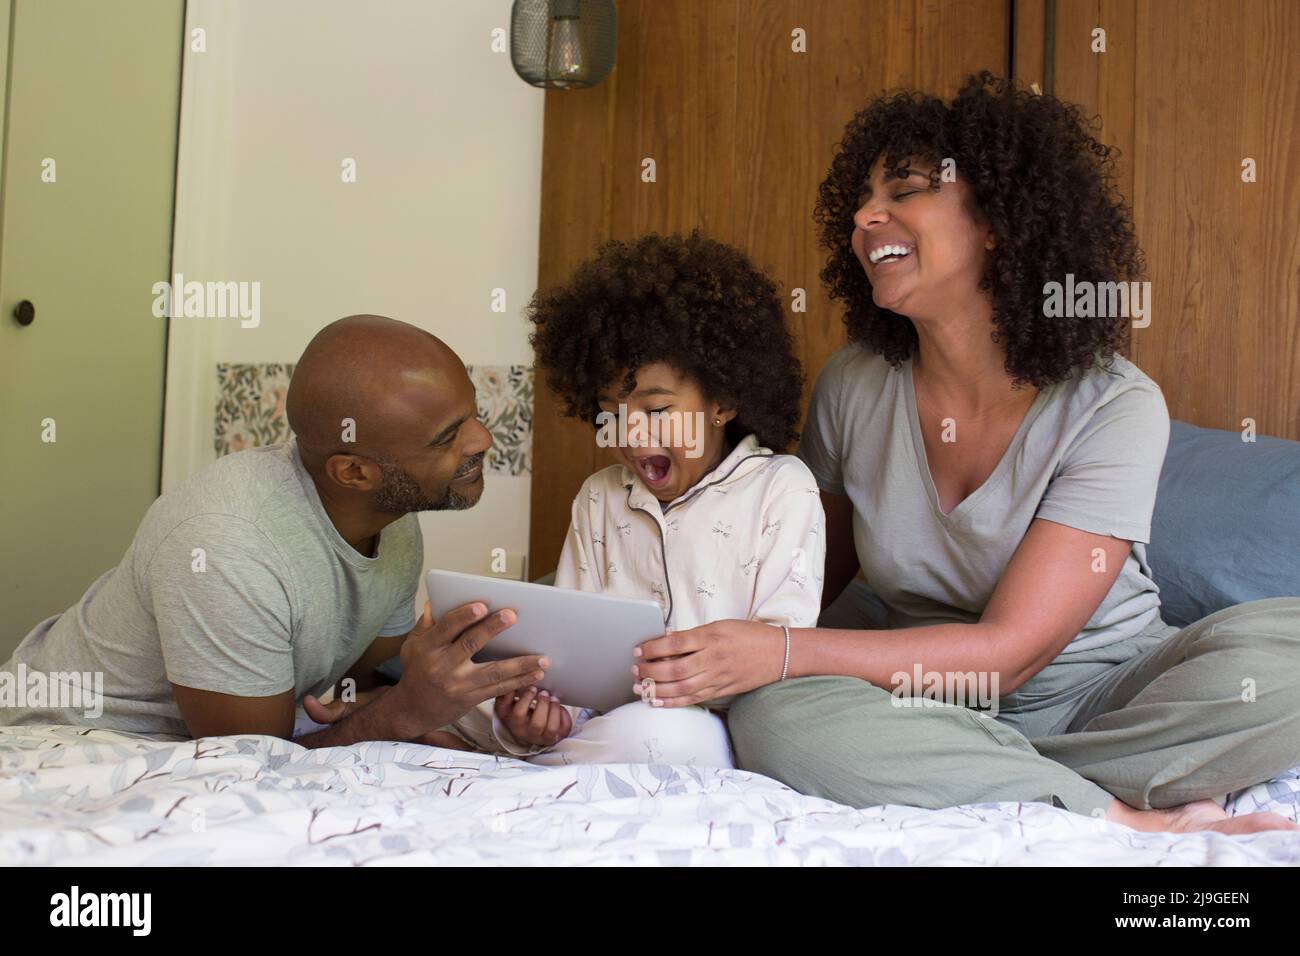 Parents with daughter using digital tablet in bedroom Stock Photo